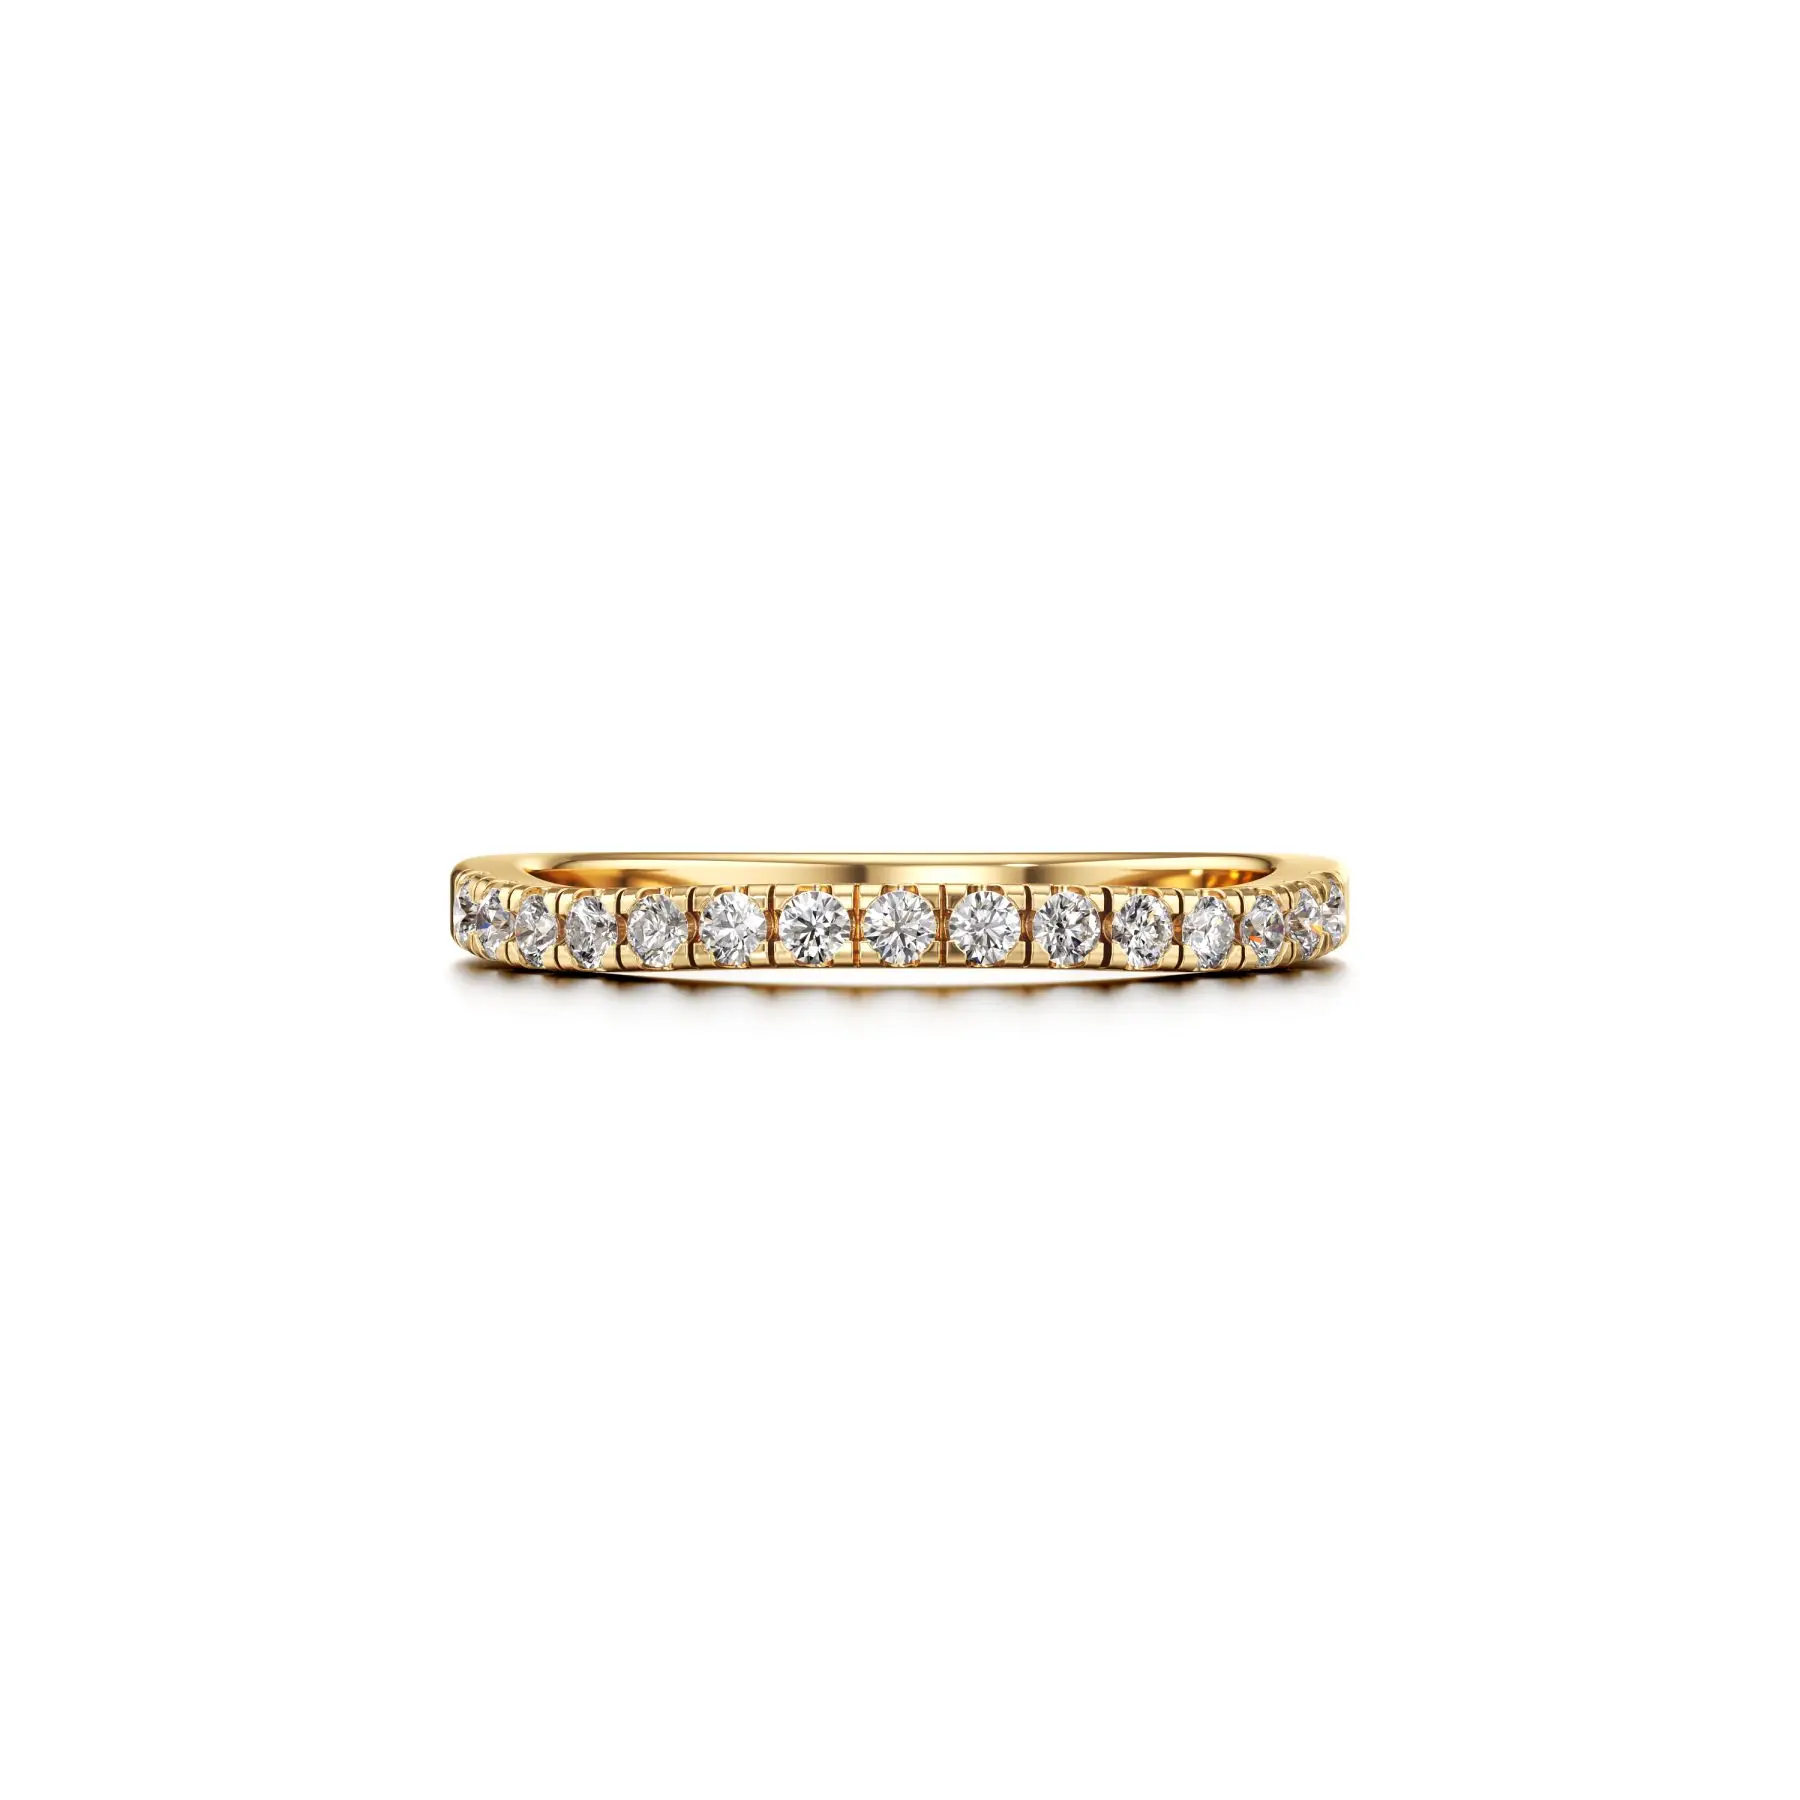 Solitaire Diamond Ring in Yellow 10k Gold